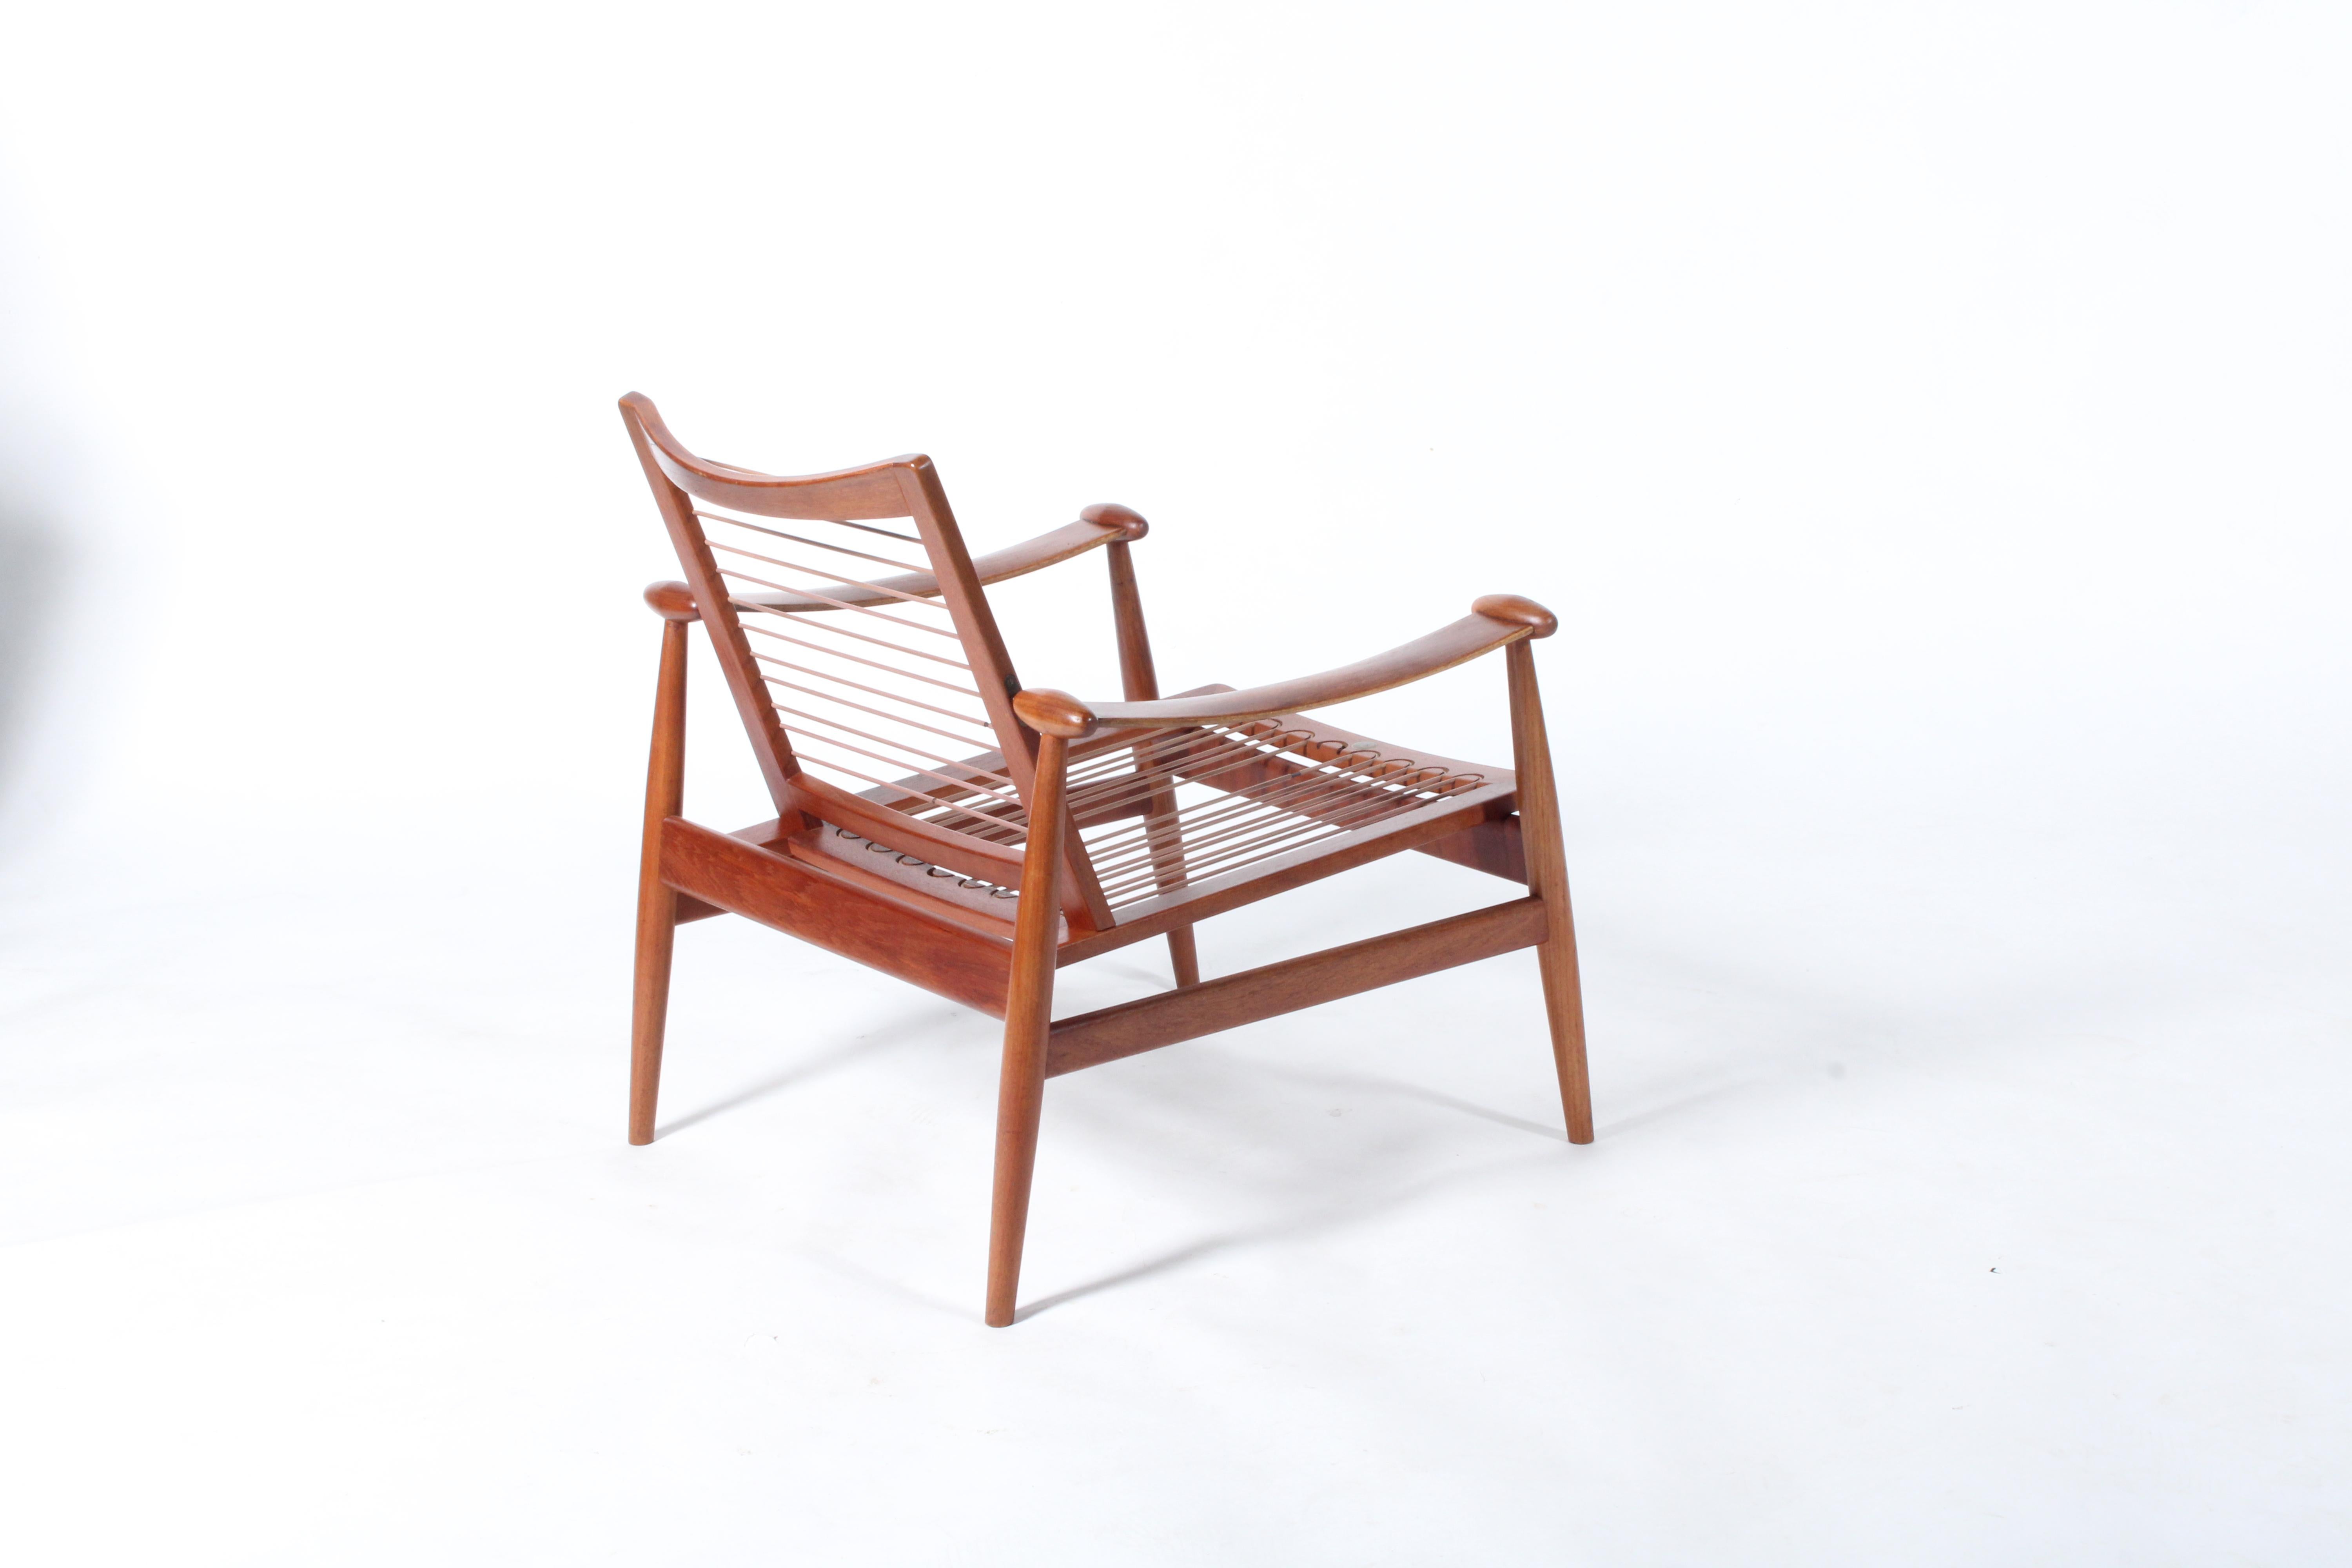 Exquisite Mid Century Danish Spade Chair By Finn Juhl For France & Son In Teak For Sale 4